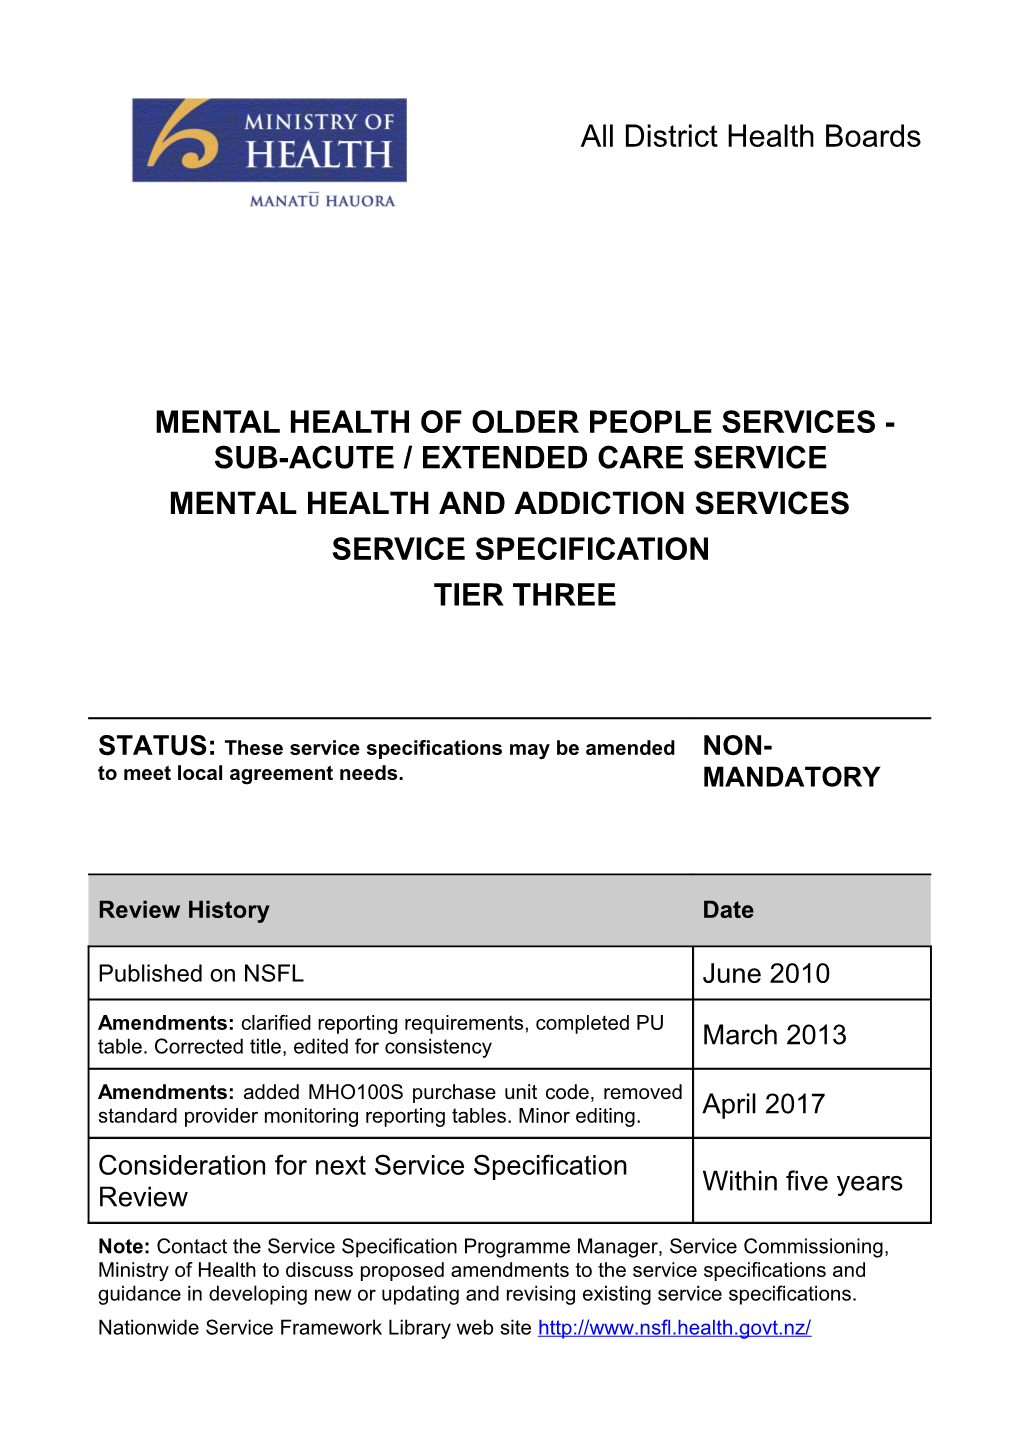 Mental Health of Older People Services - Sub-Acute / Extended Care Service